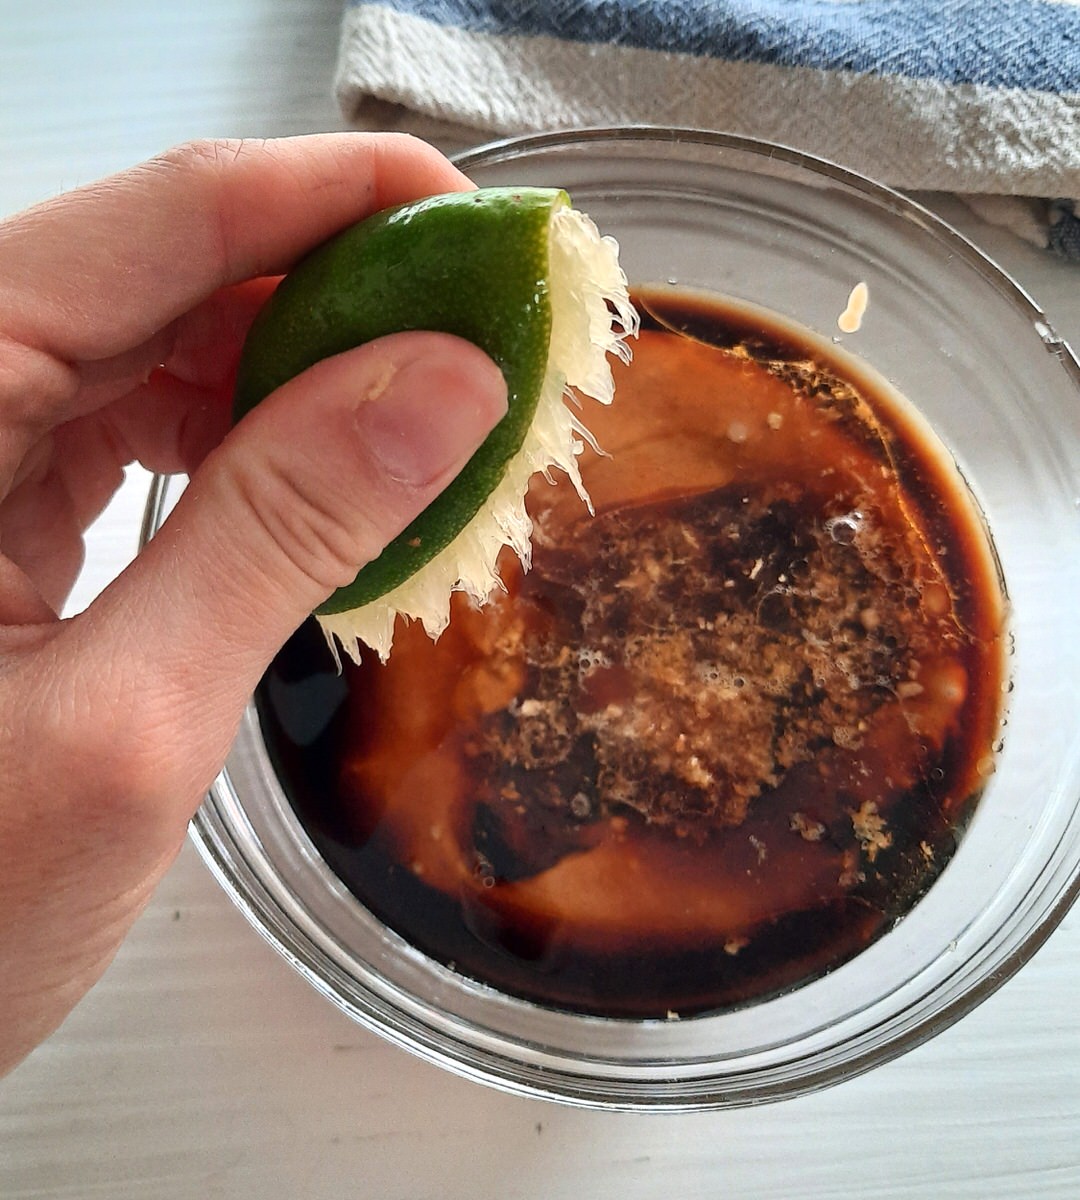 a hand squeezes the juice from a lime into a bowl of peanut dipping sauce